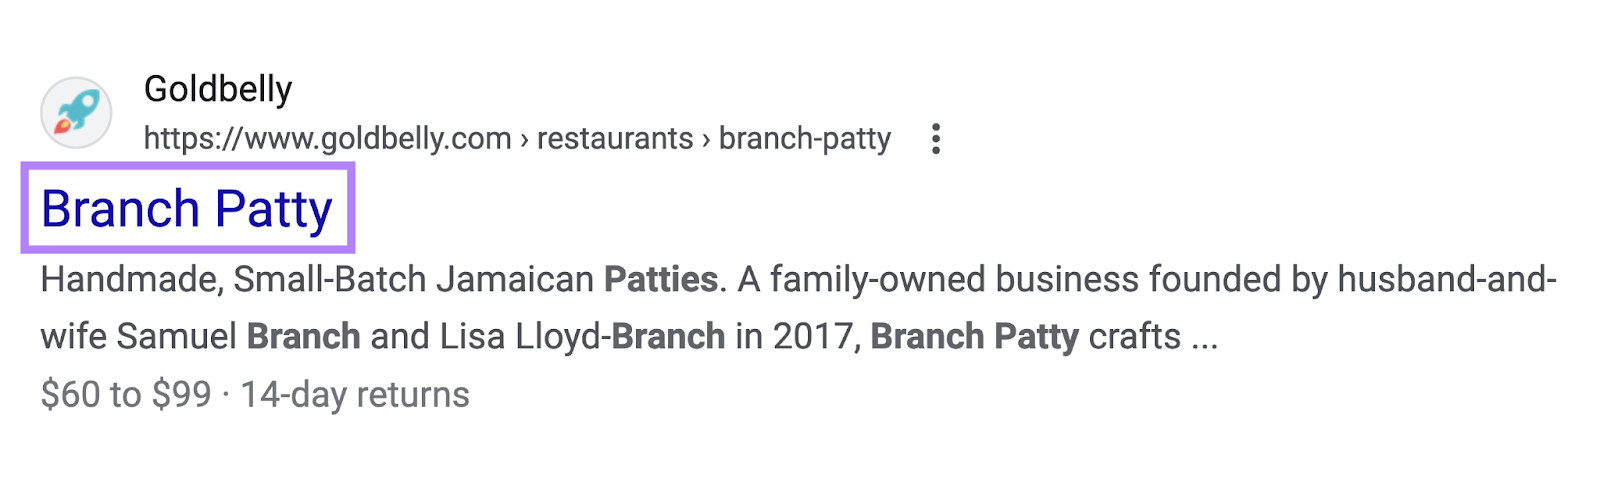 title tag highlighted that says Branch Patty